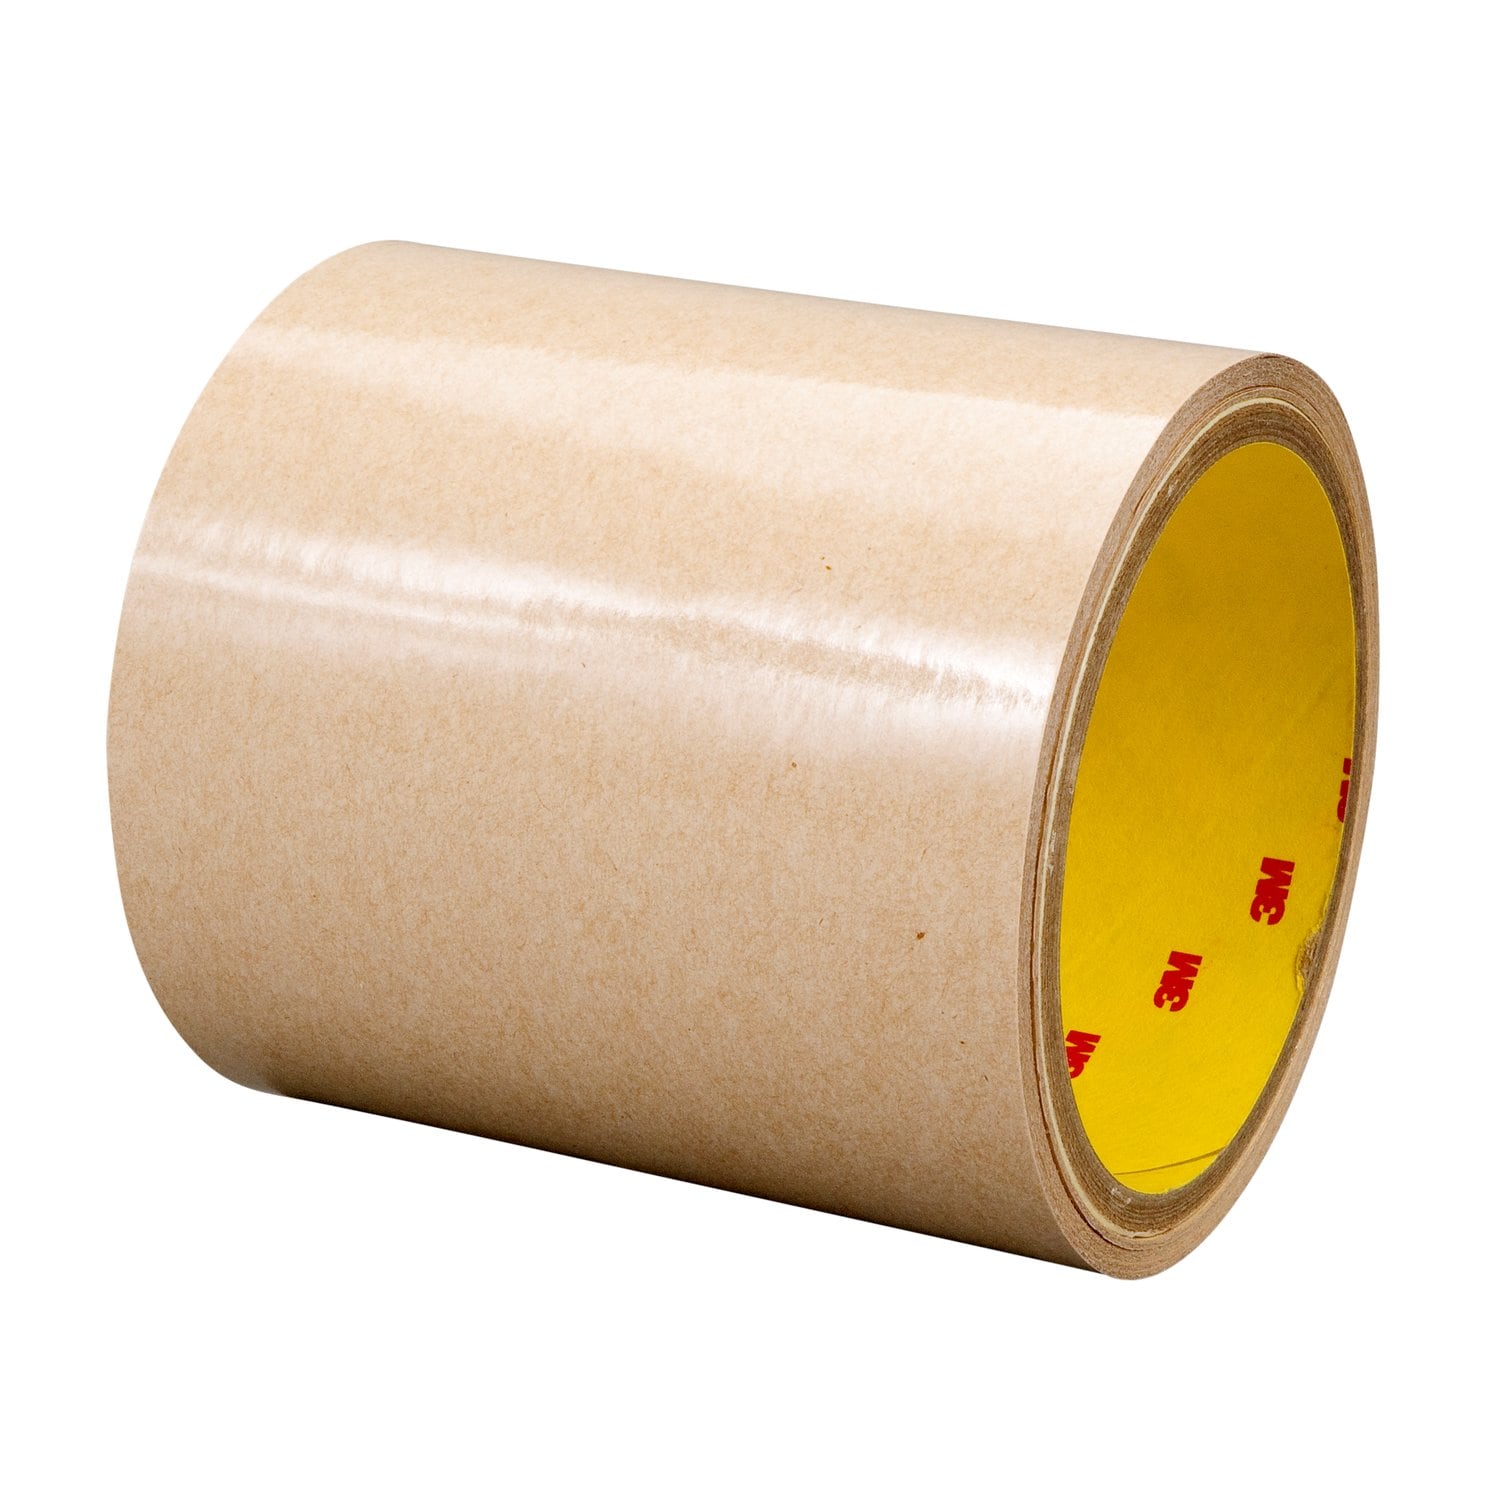 7100166326 - 3M Adhesive Transfer Tape 9626, Clear, 48 in x 180 yd, 2 mil, 1 roll per case